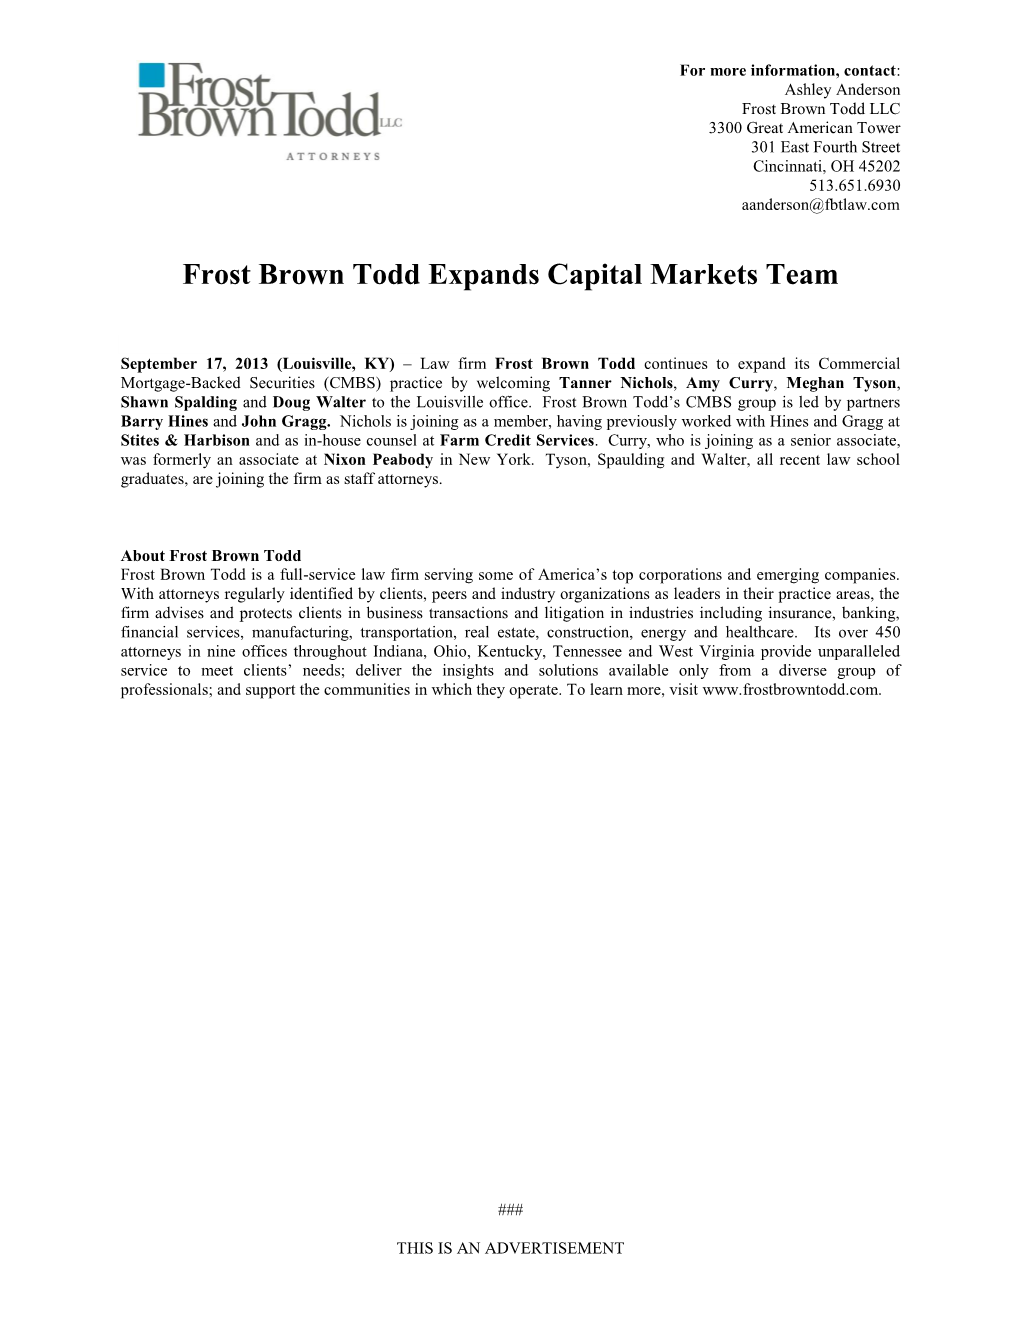 Frost Brown Todd Expands Capital Markets Team